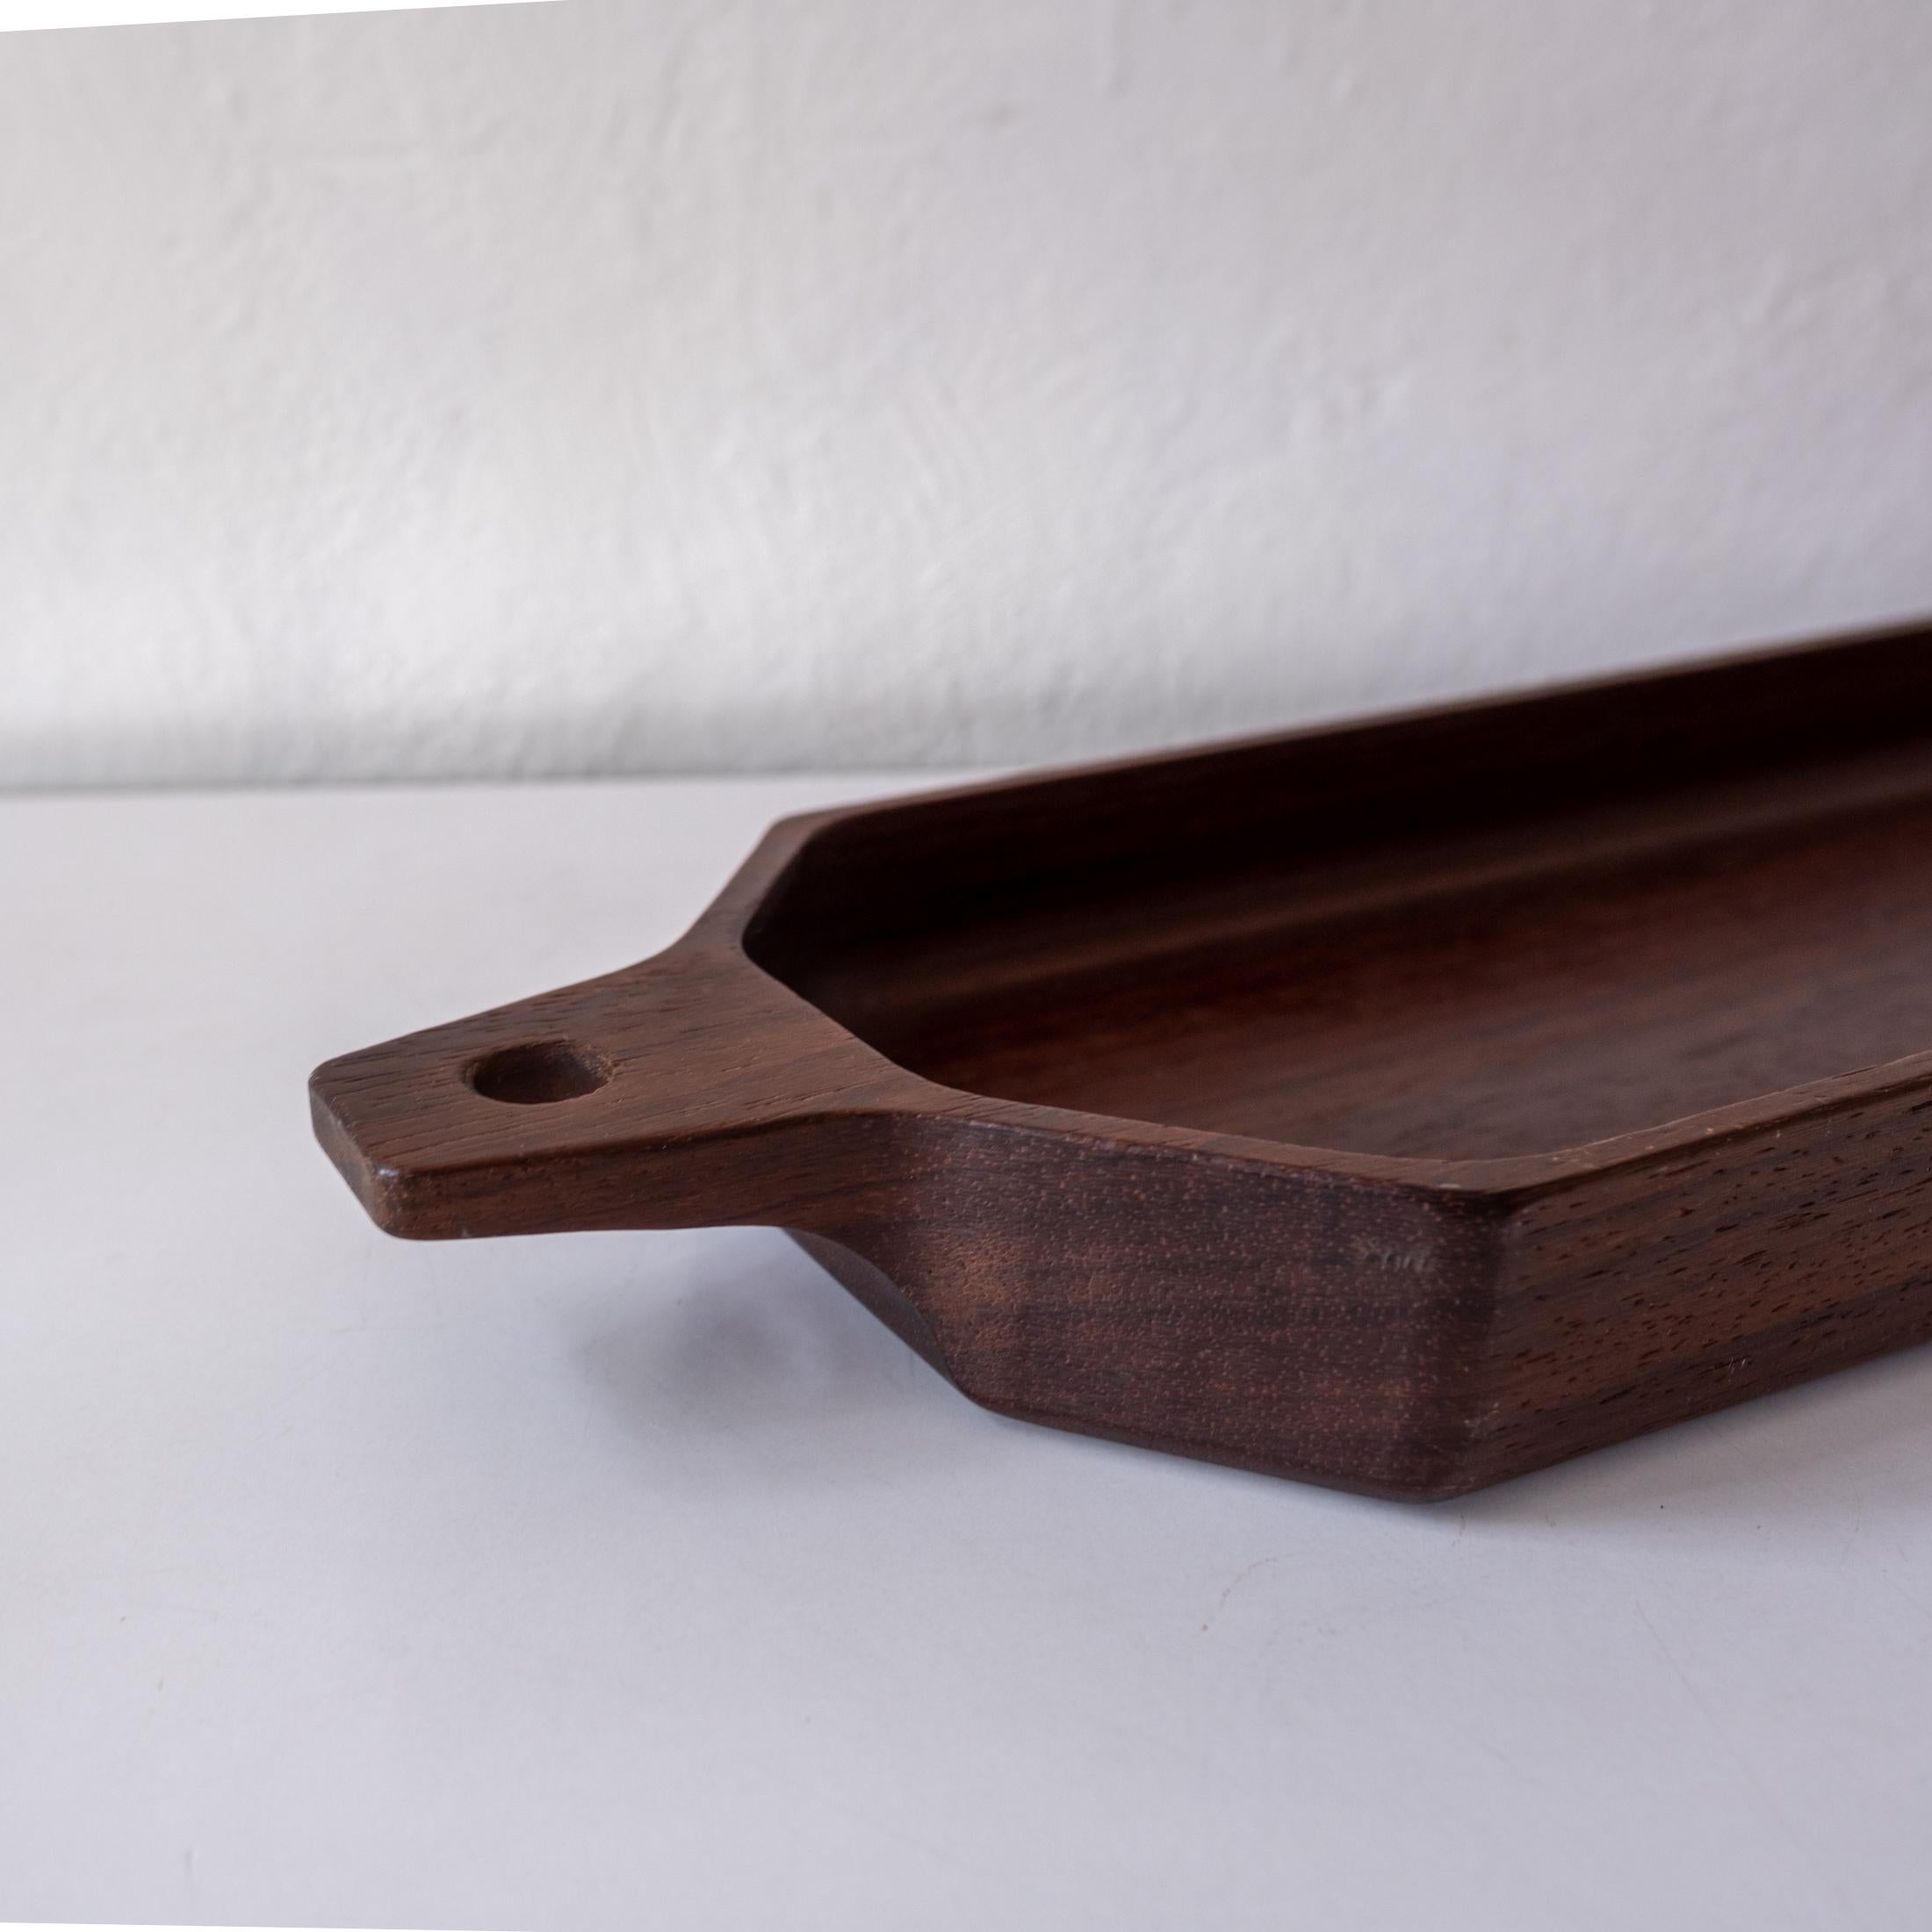 Sculptural Midcentury Italian Wood Centerpiece Bowl or Catch All by Anri, 1950s For Sale 5